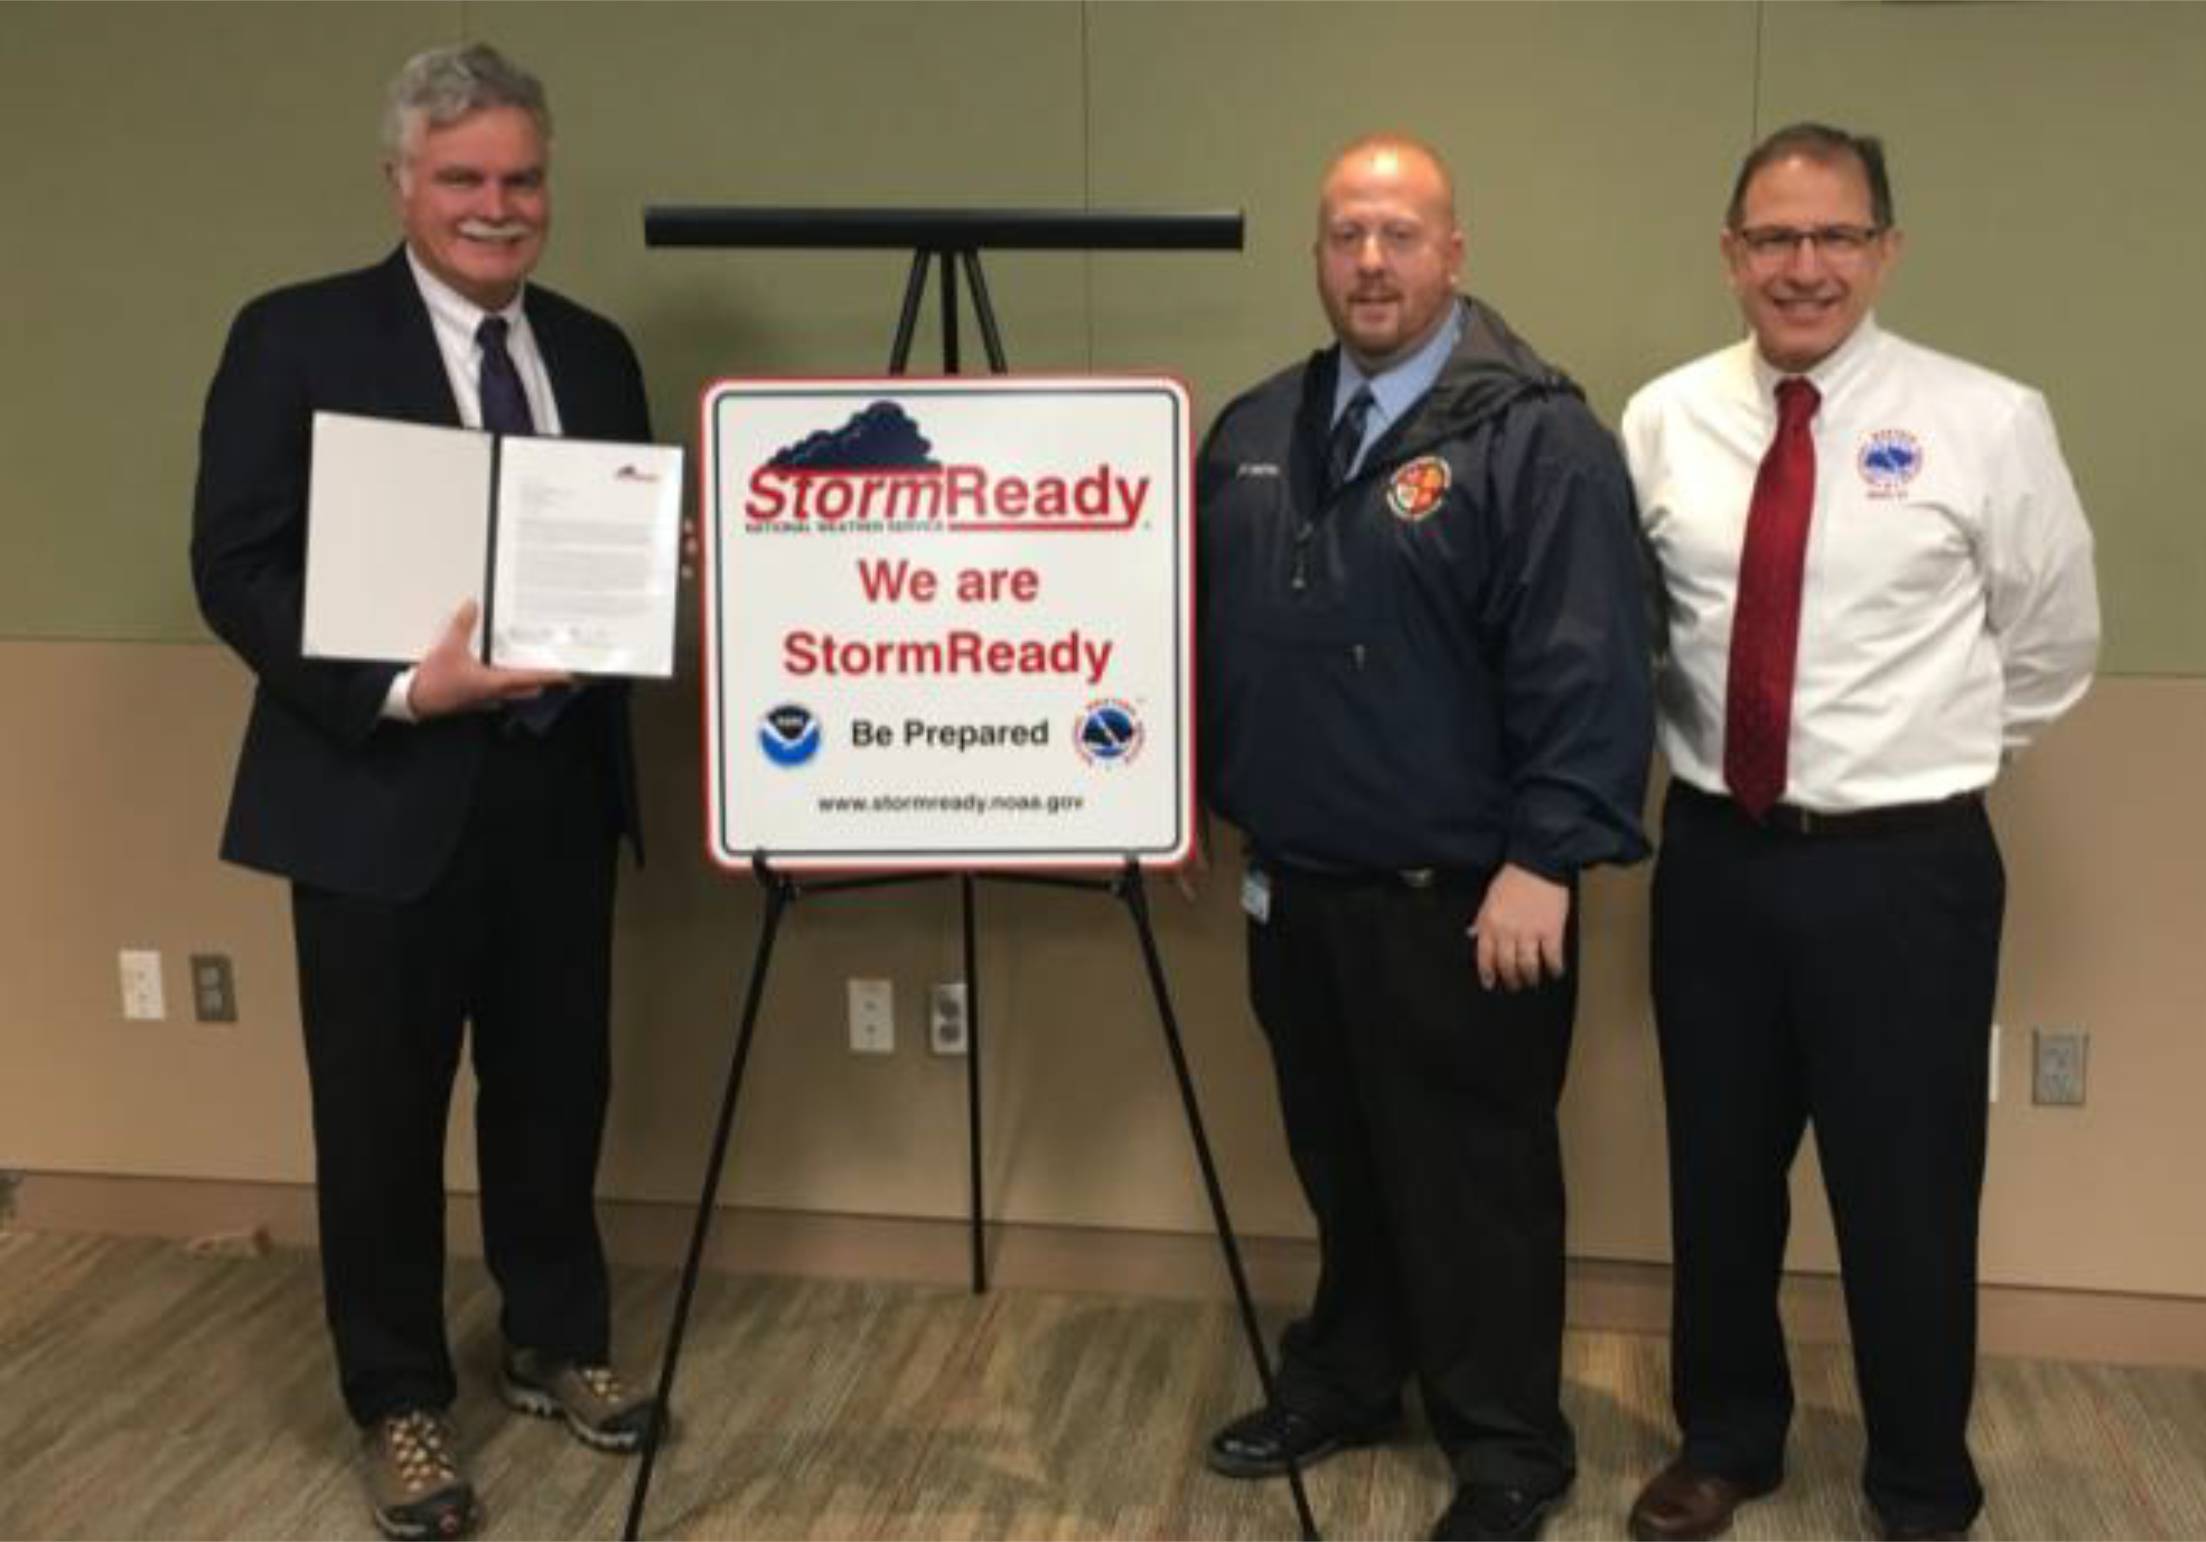 Representatives from the National Weather Service present Montgomery County with a StormReady sign and letter designating the achievement of becoming certified storm ready.